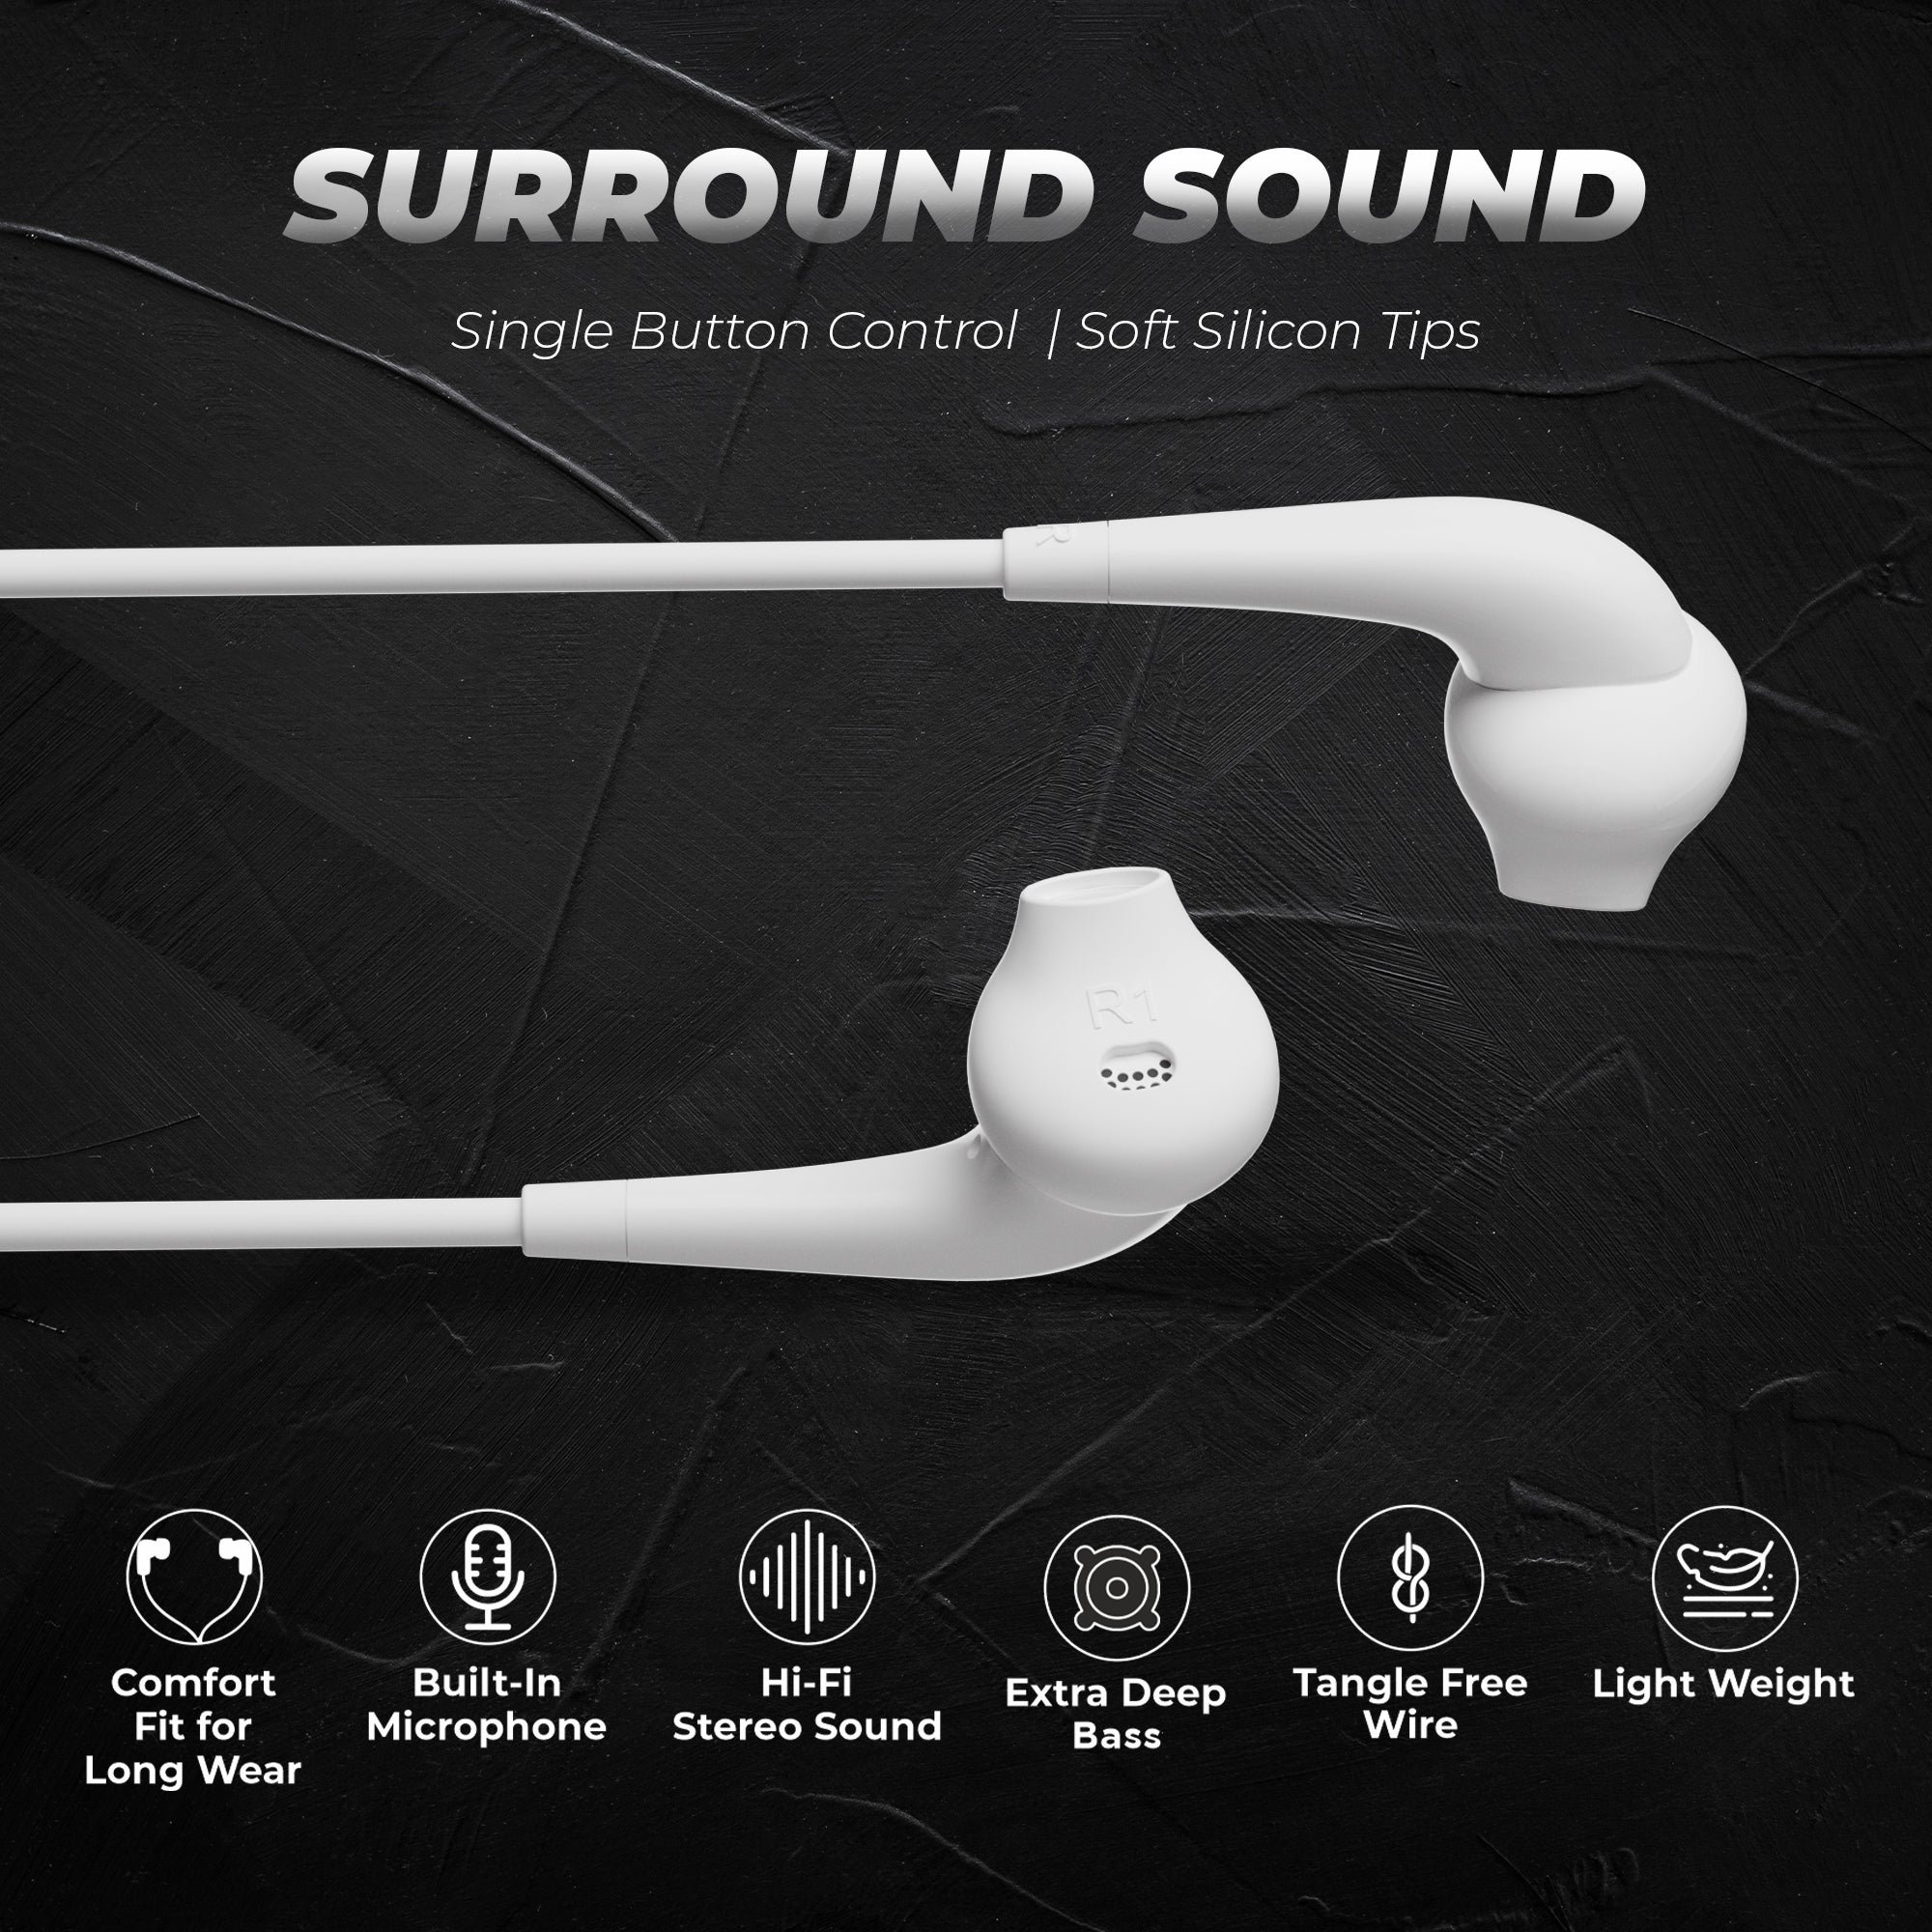 Gizmore ME345 In-Ear Wired Earphone with Hi-Fi Stereo Sound, Extra Deep Bass, Tangle Free Cable and Single Button Control